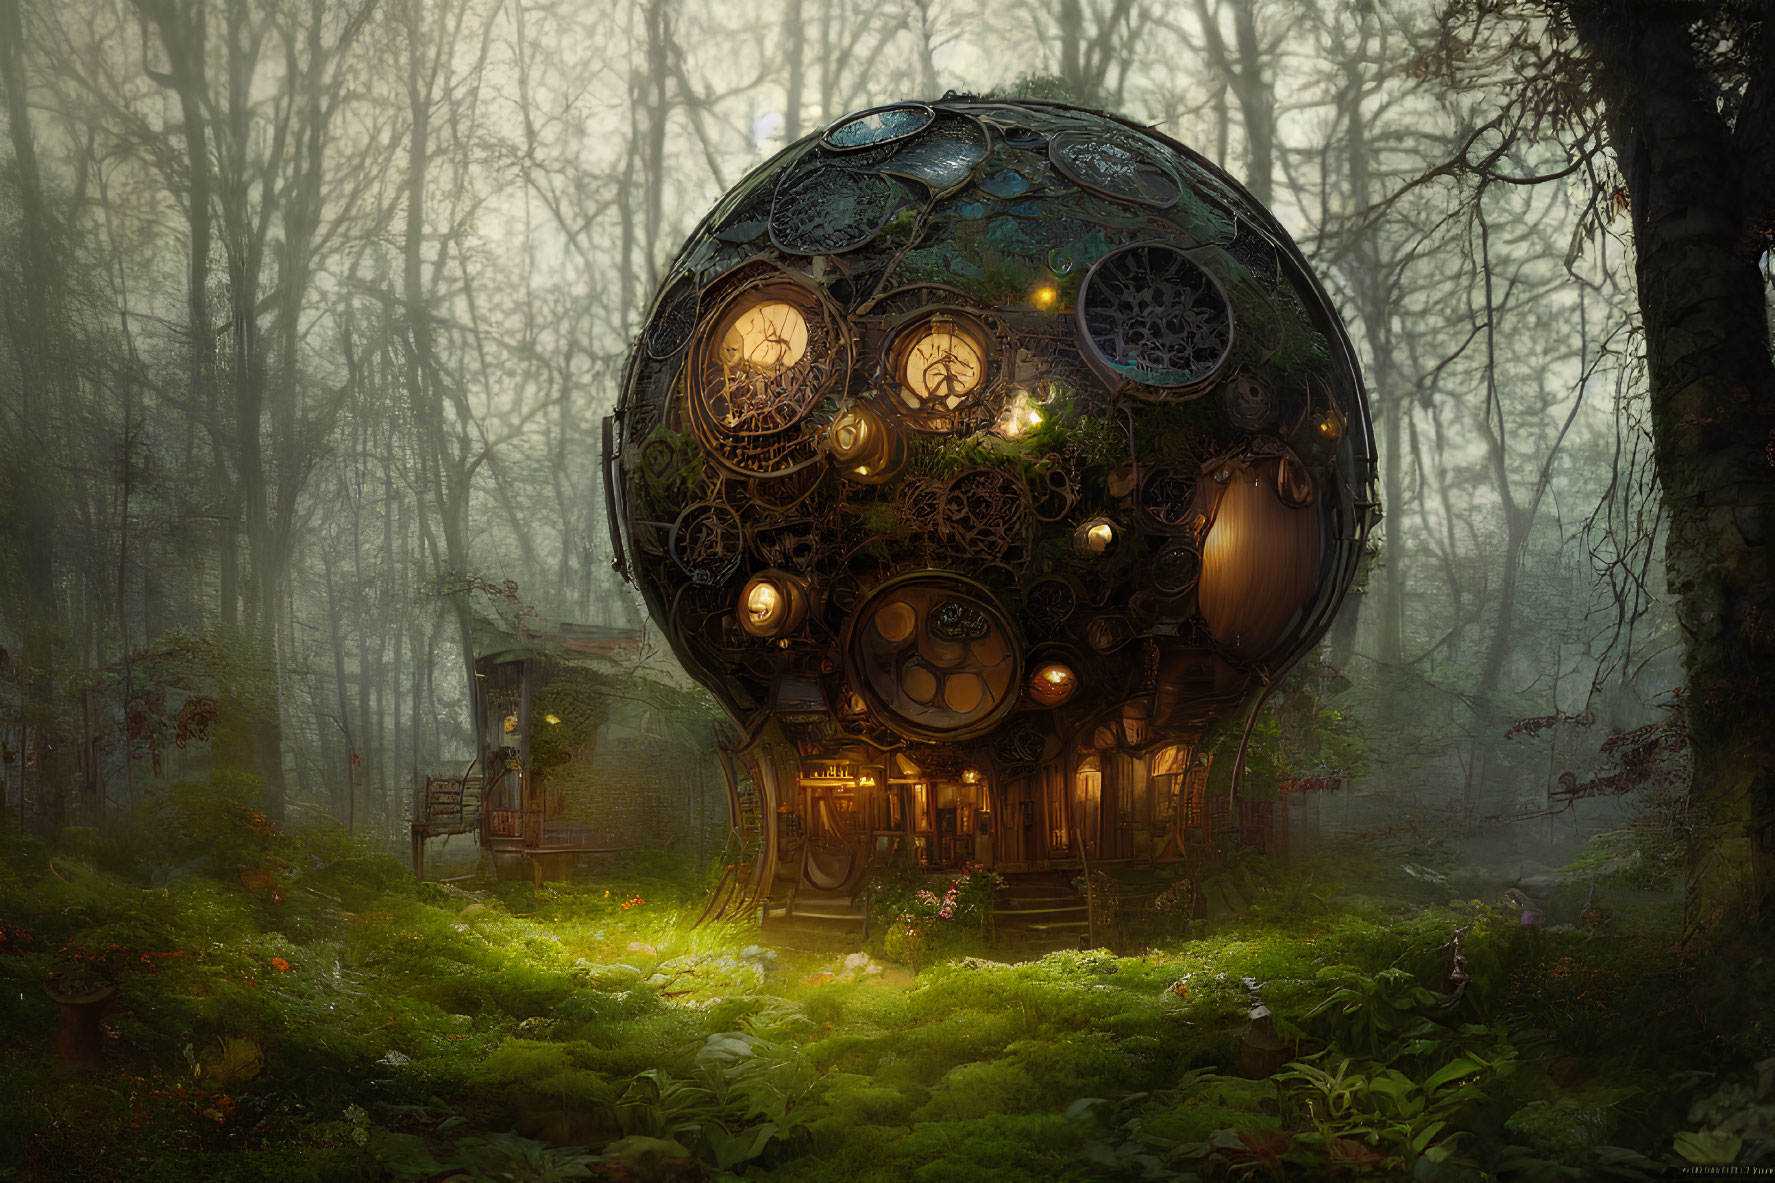 Intricate spherical structure in misty forest with glowing windows